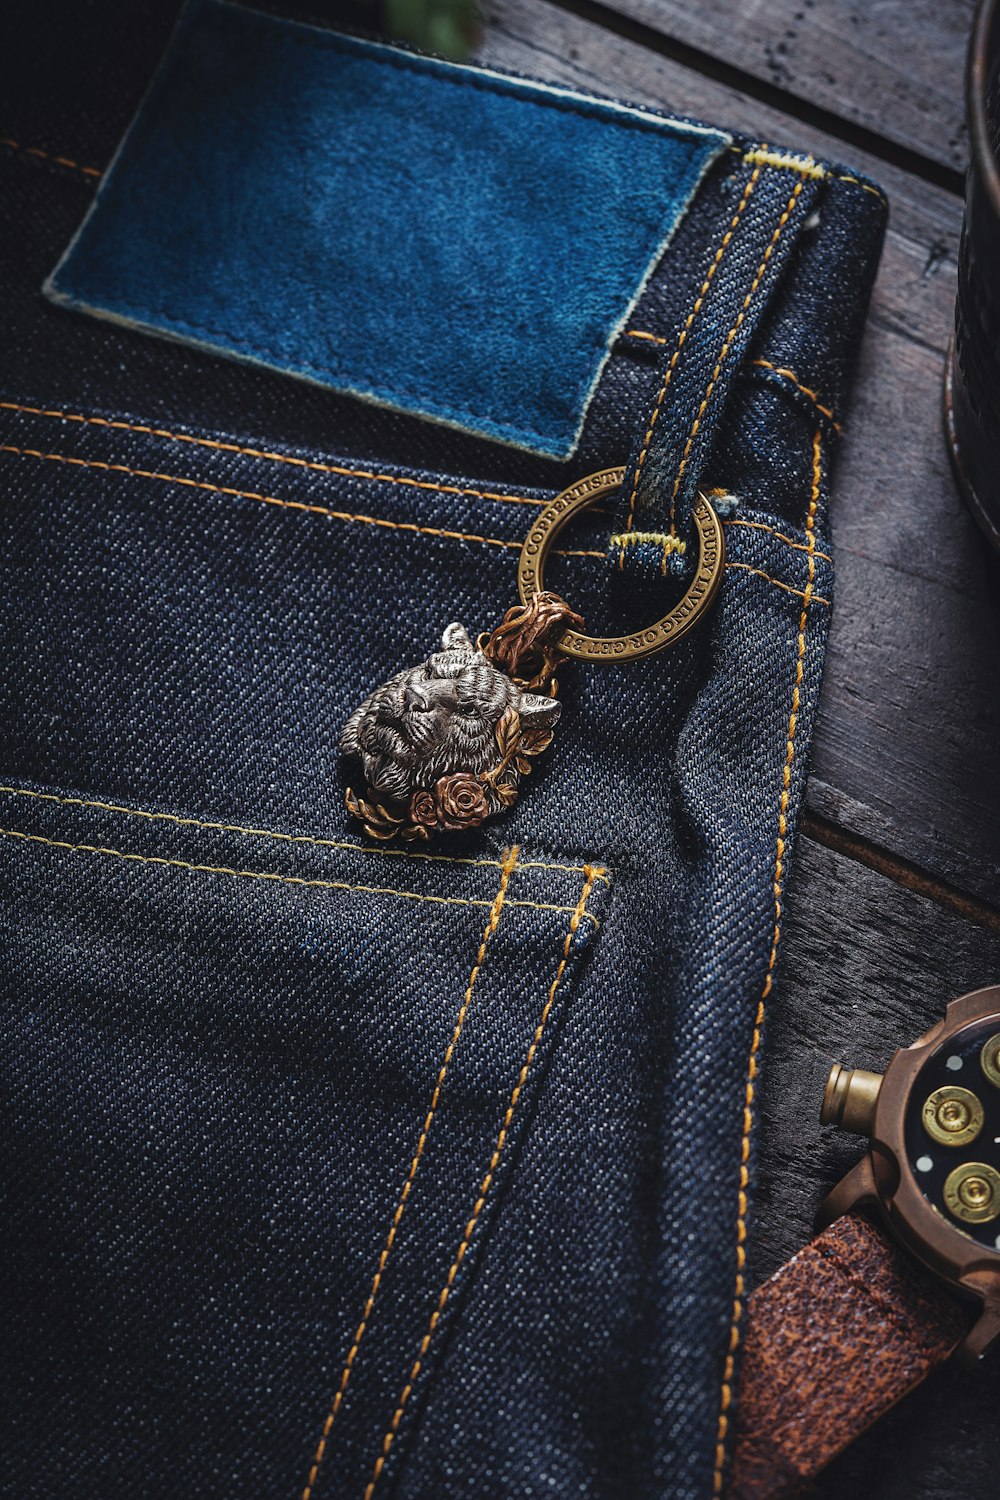 A pocket watch sitting on top of a pair of jeans photo – Free Pants Image  on Unsplash